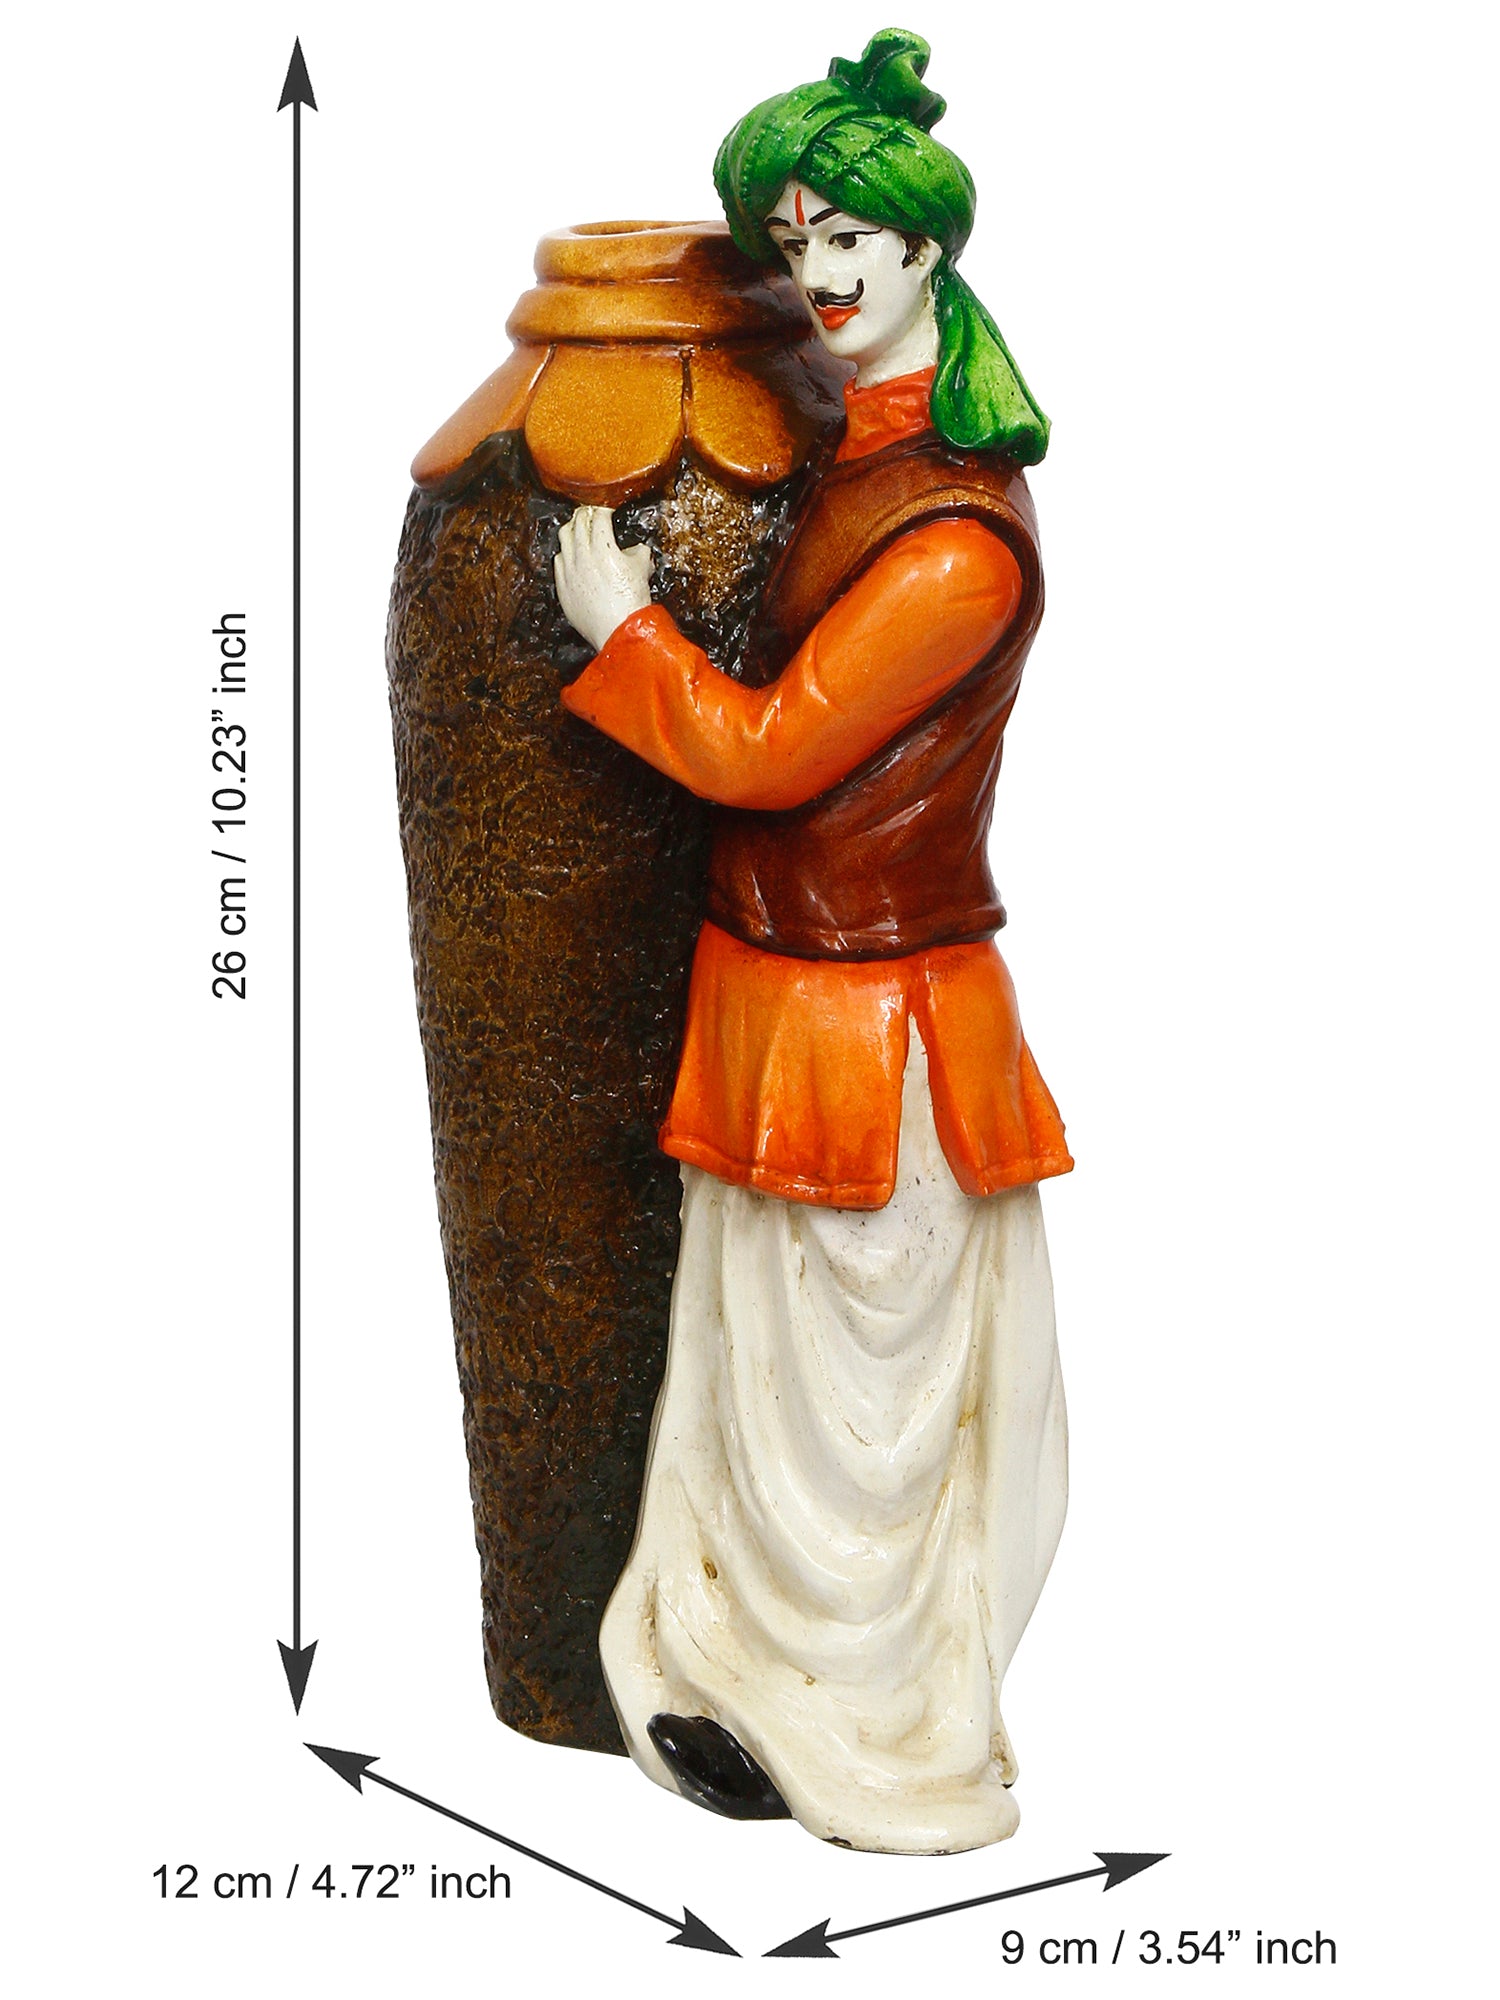 Rajasthani Men with Flower Pot Decorative Handcrafted Polyresin Showpiece 3